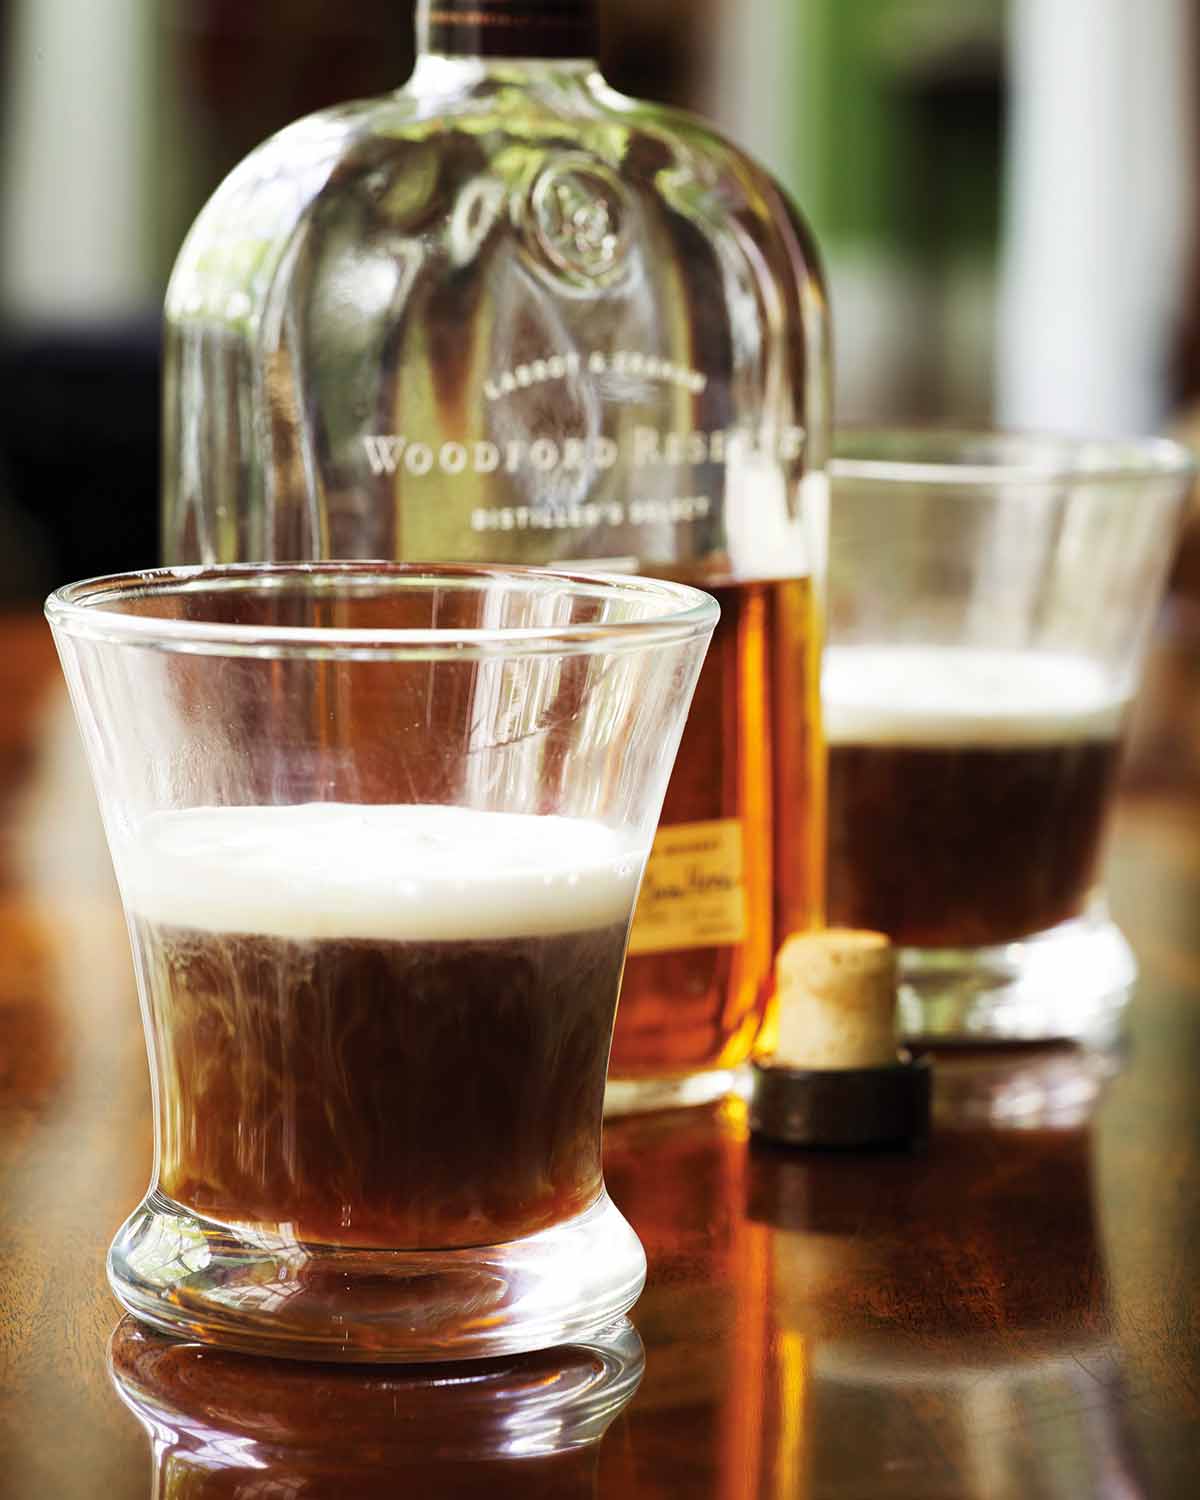 Two glasses half-filled with Kentucky coffee and an open bottle of bourbon between them.